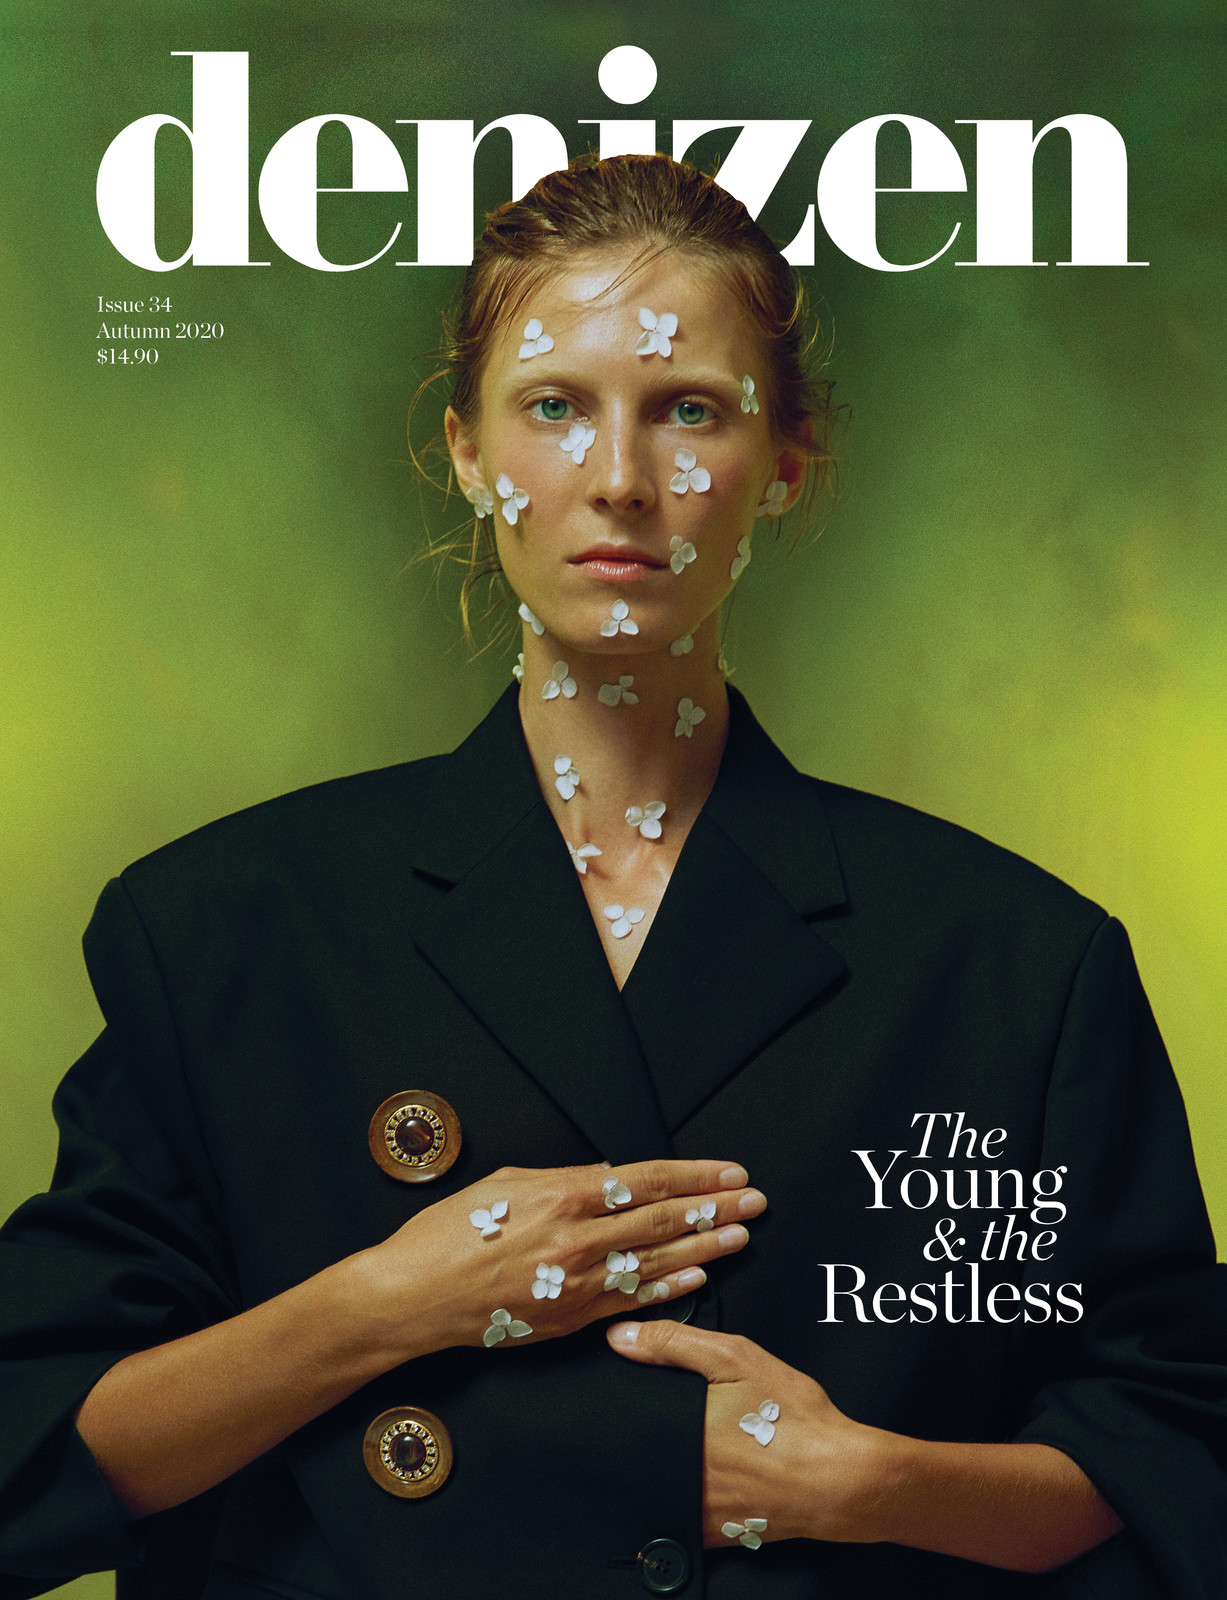 The Young and The Restless - Denizen Magazine